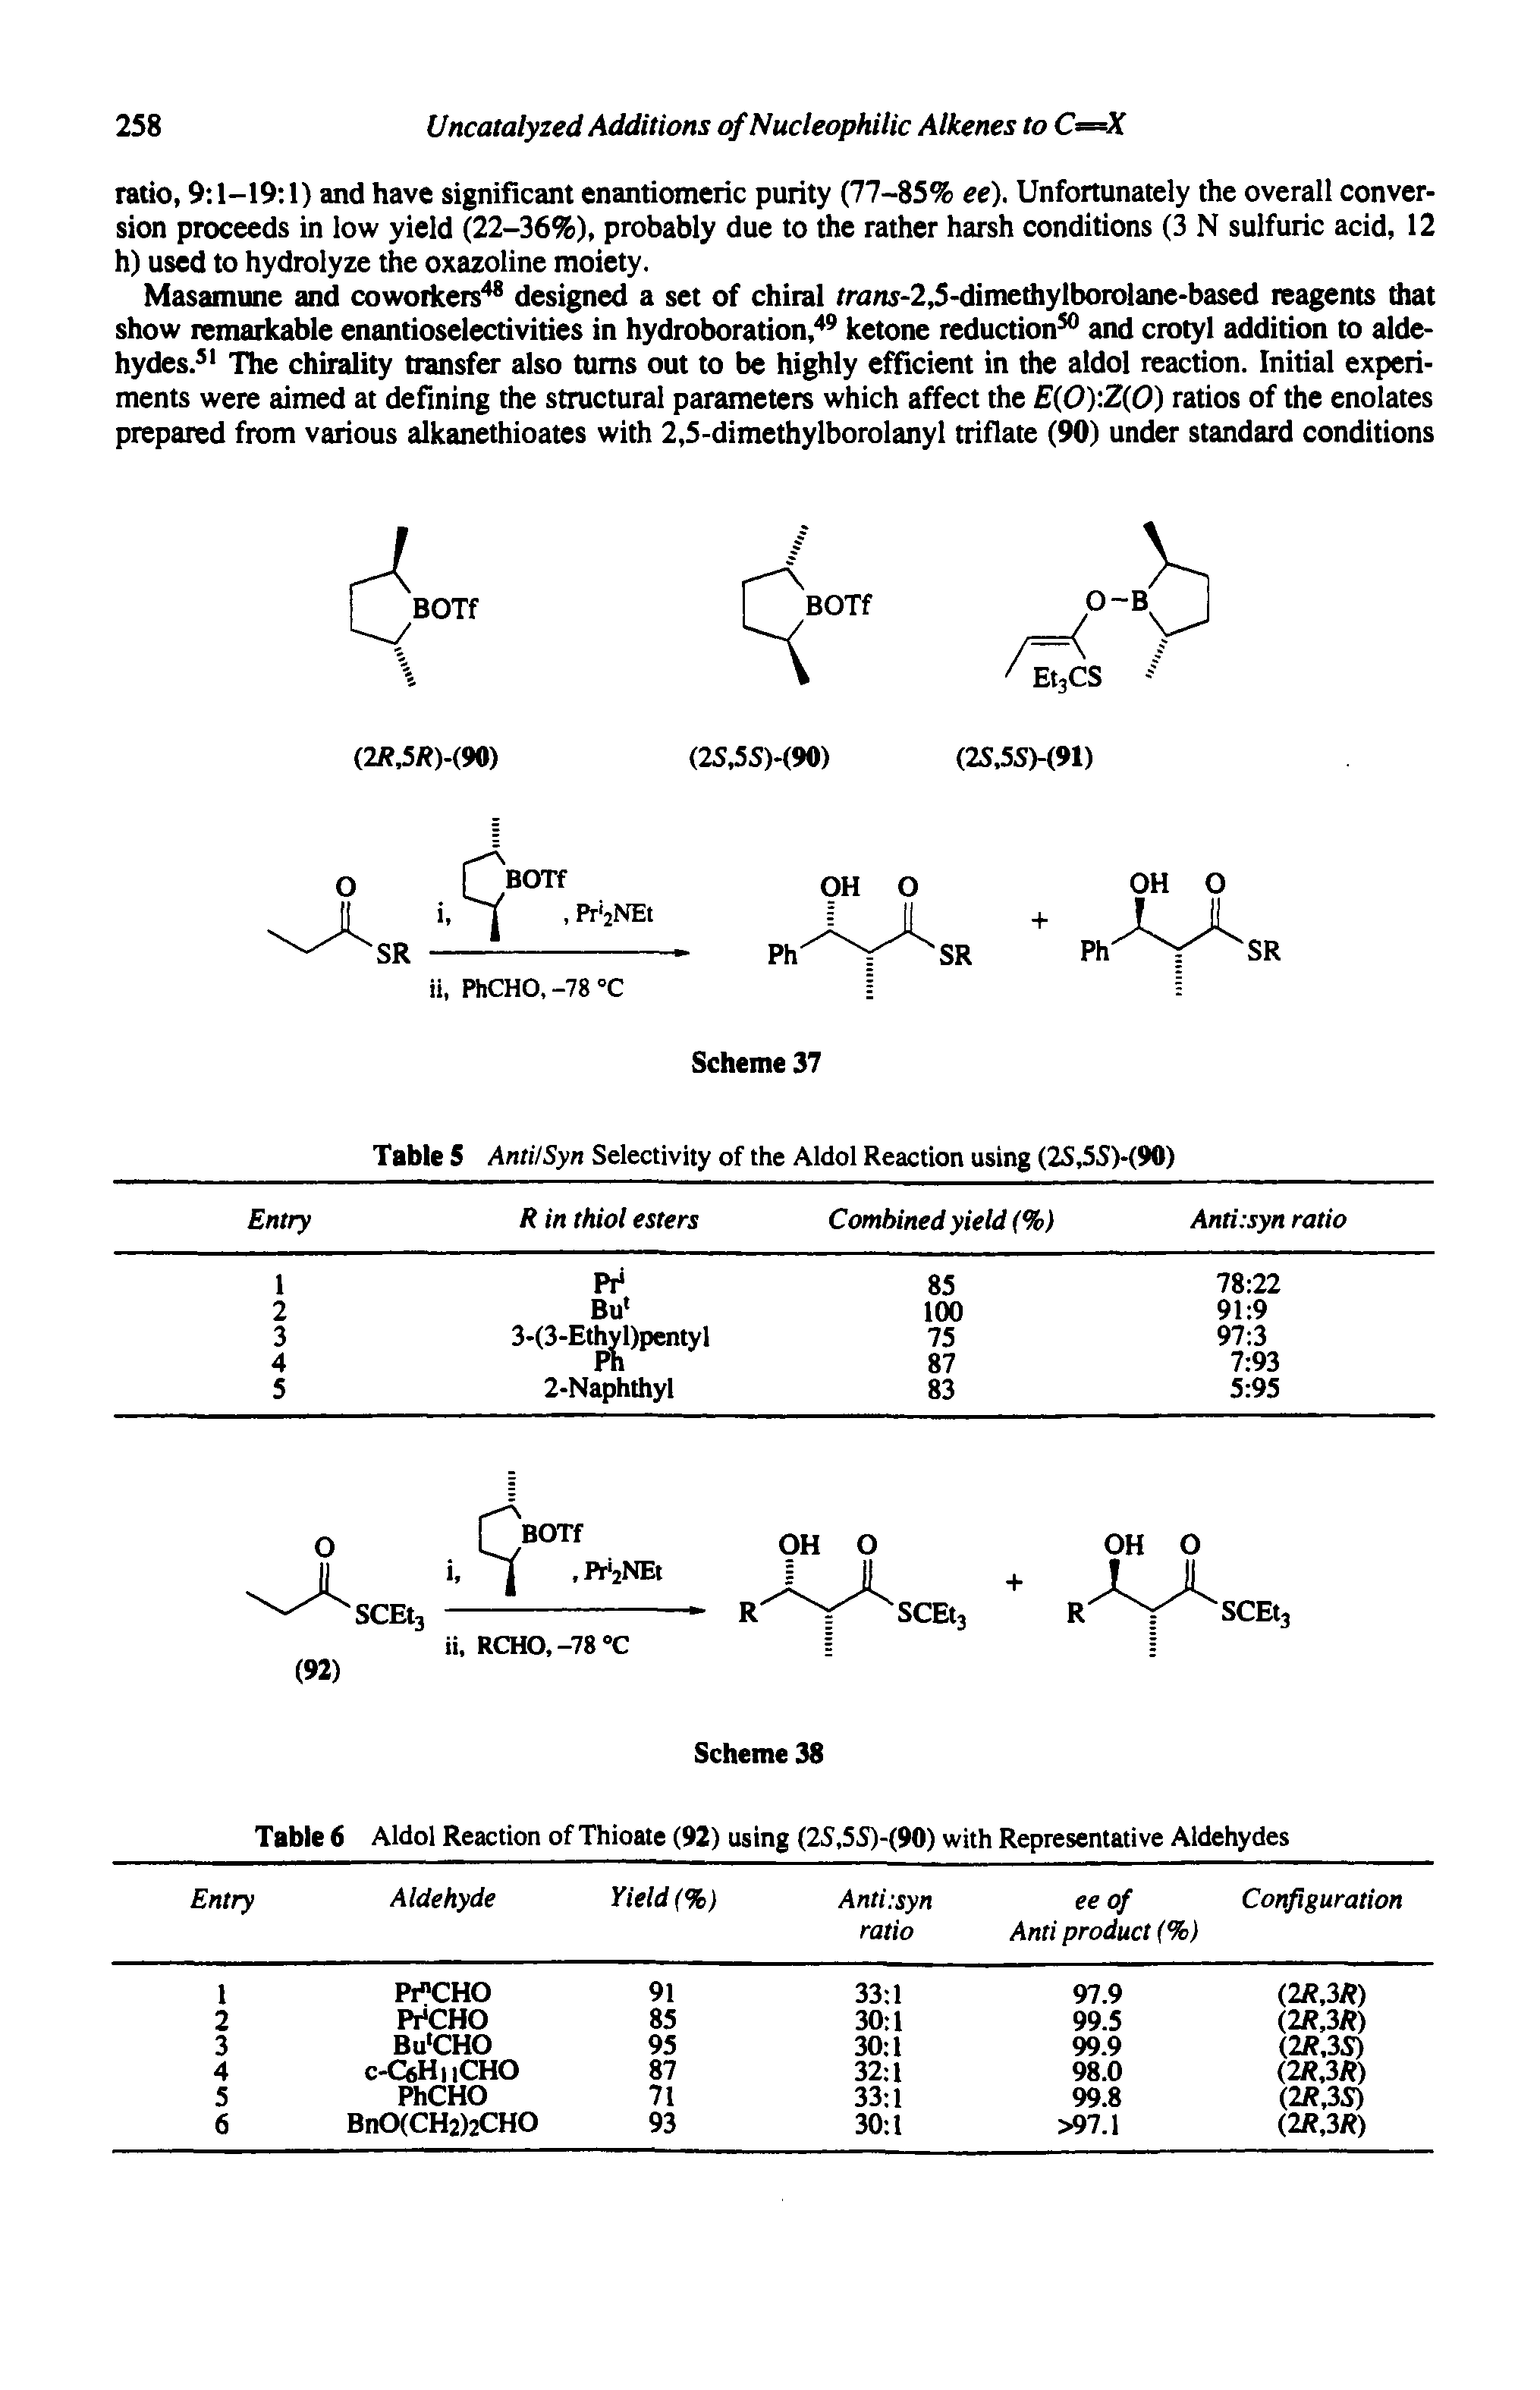 Table 5 Anti/Syn Selectivity of the Aldol Reaction using (2S,5S)-(90)...